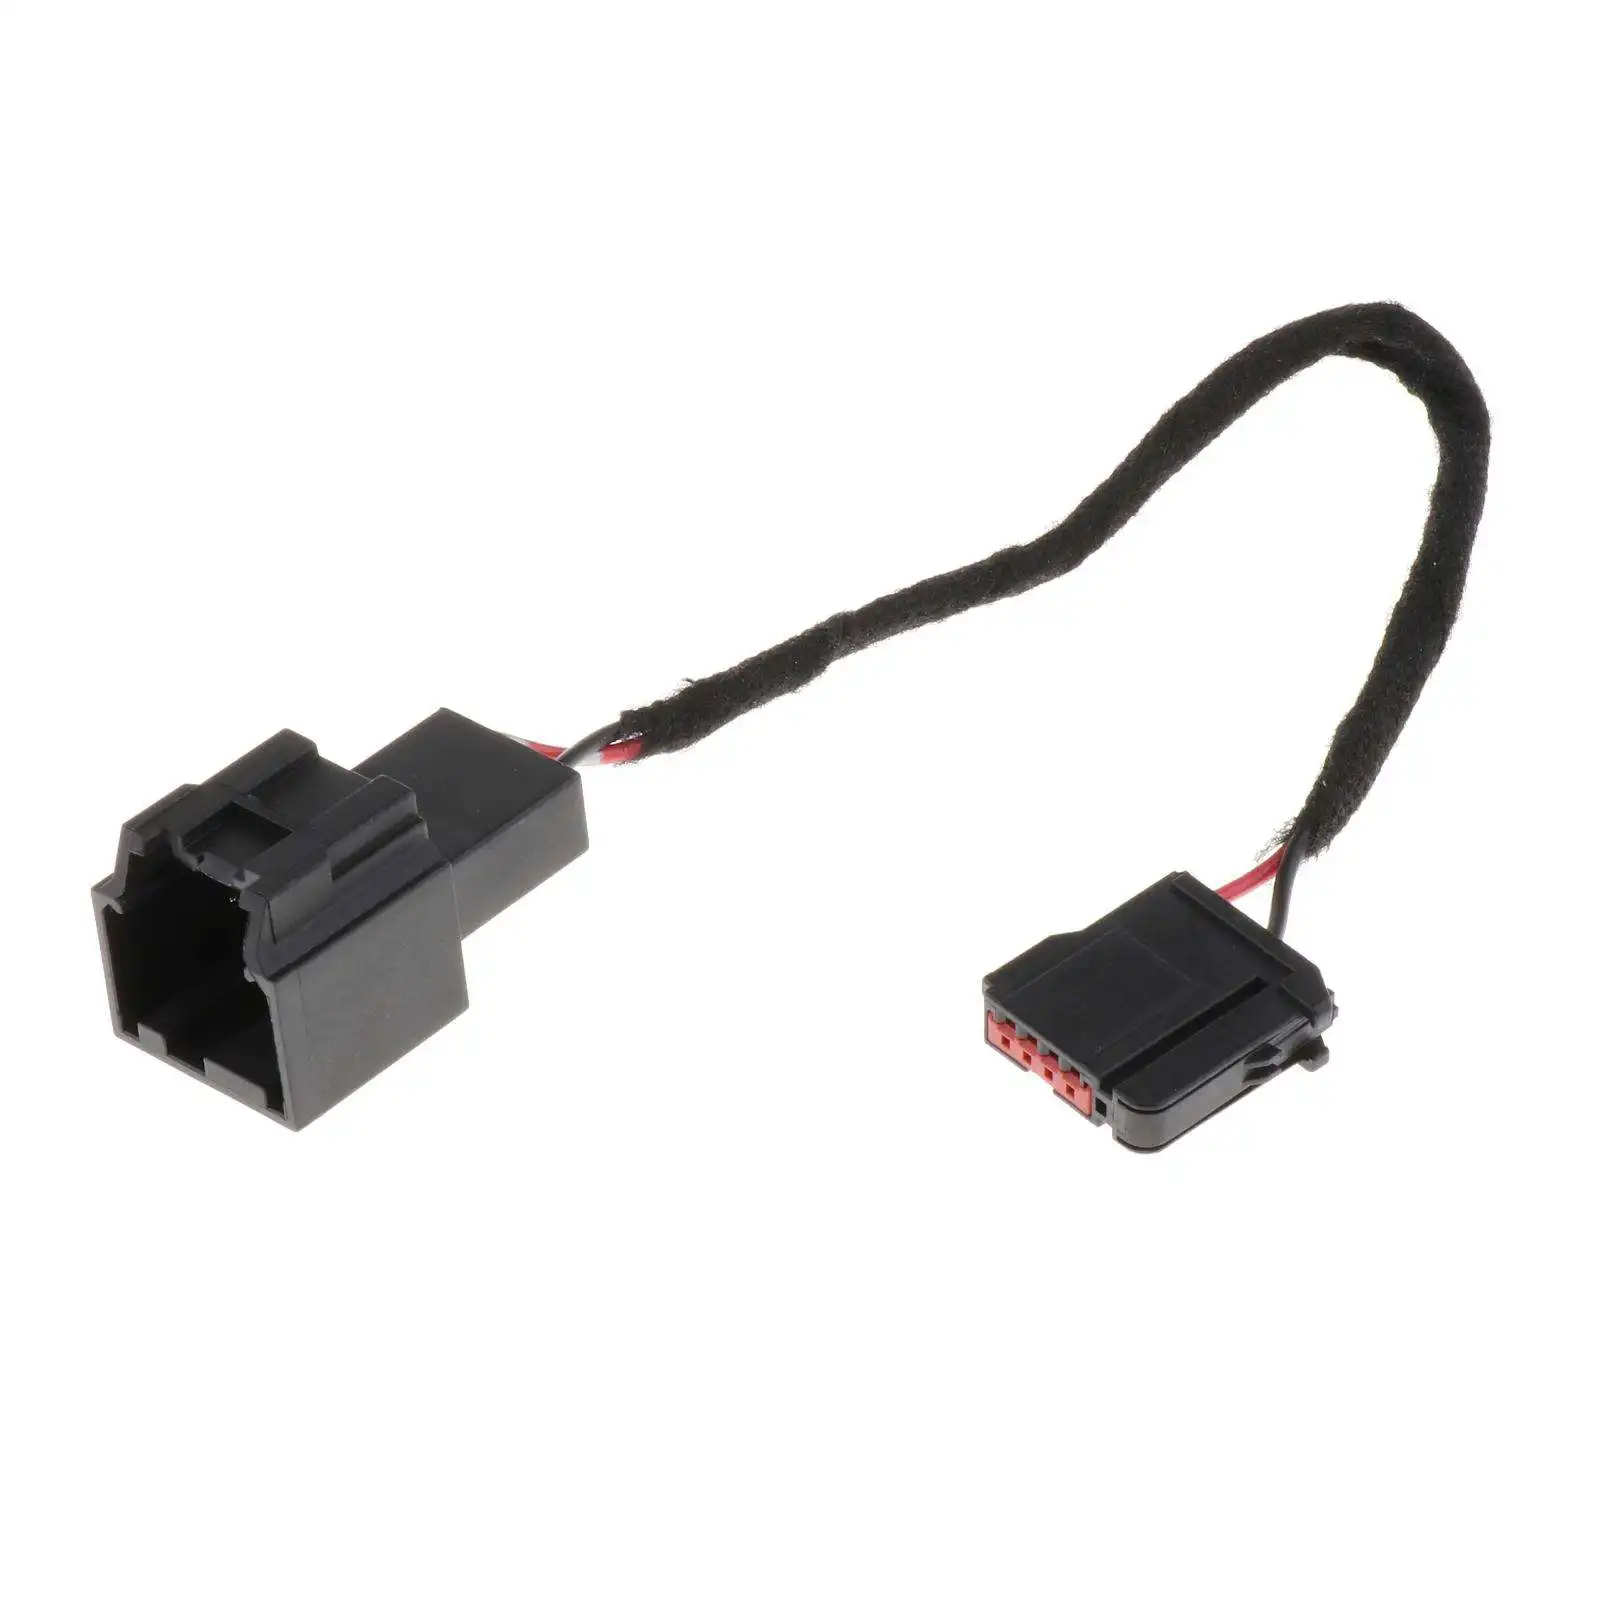 ABS Plastic Wiring Adapter GEN 1 for Ford SYNC 2 to SYNC 3 Retrofit USB Media HUB, Easy to Install, Direct Replacement